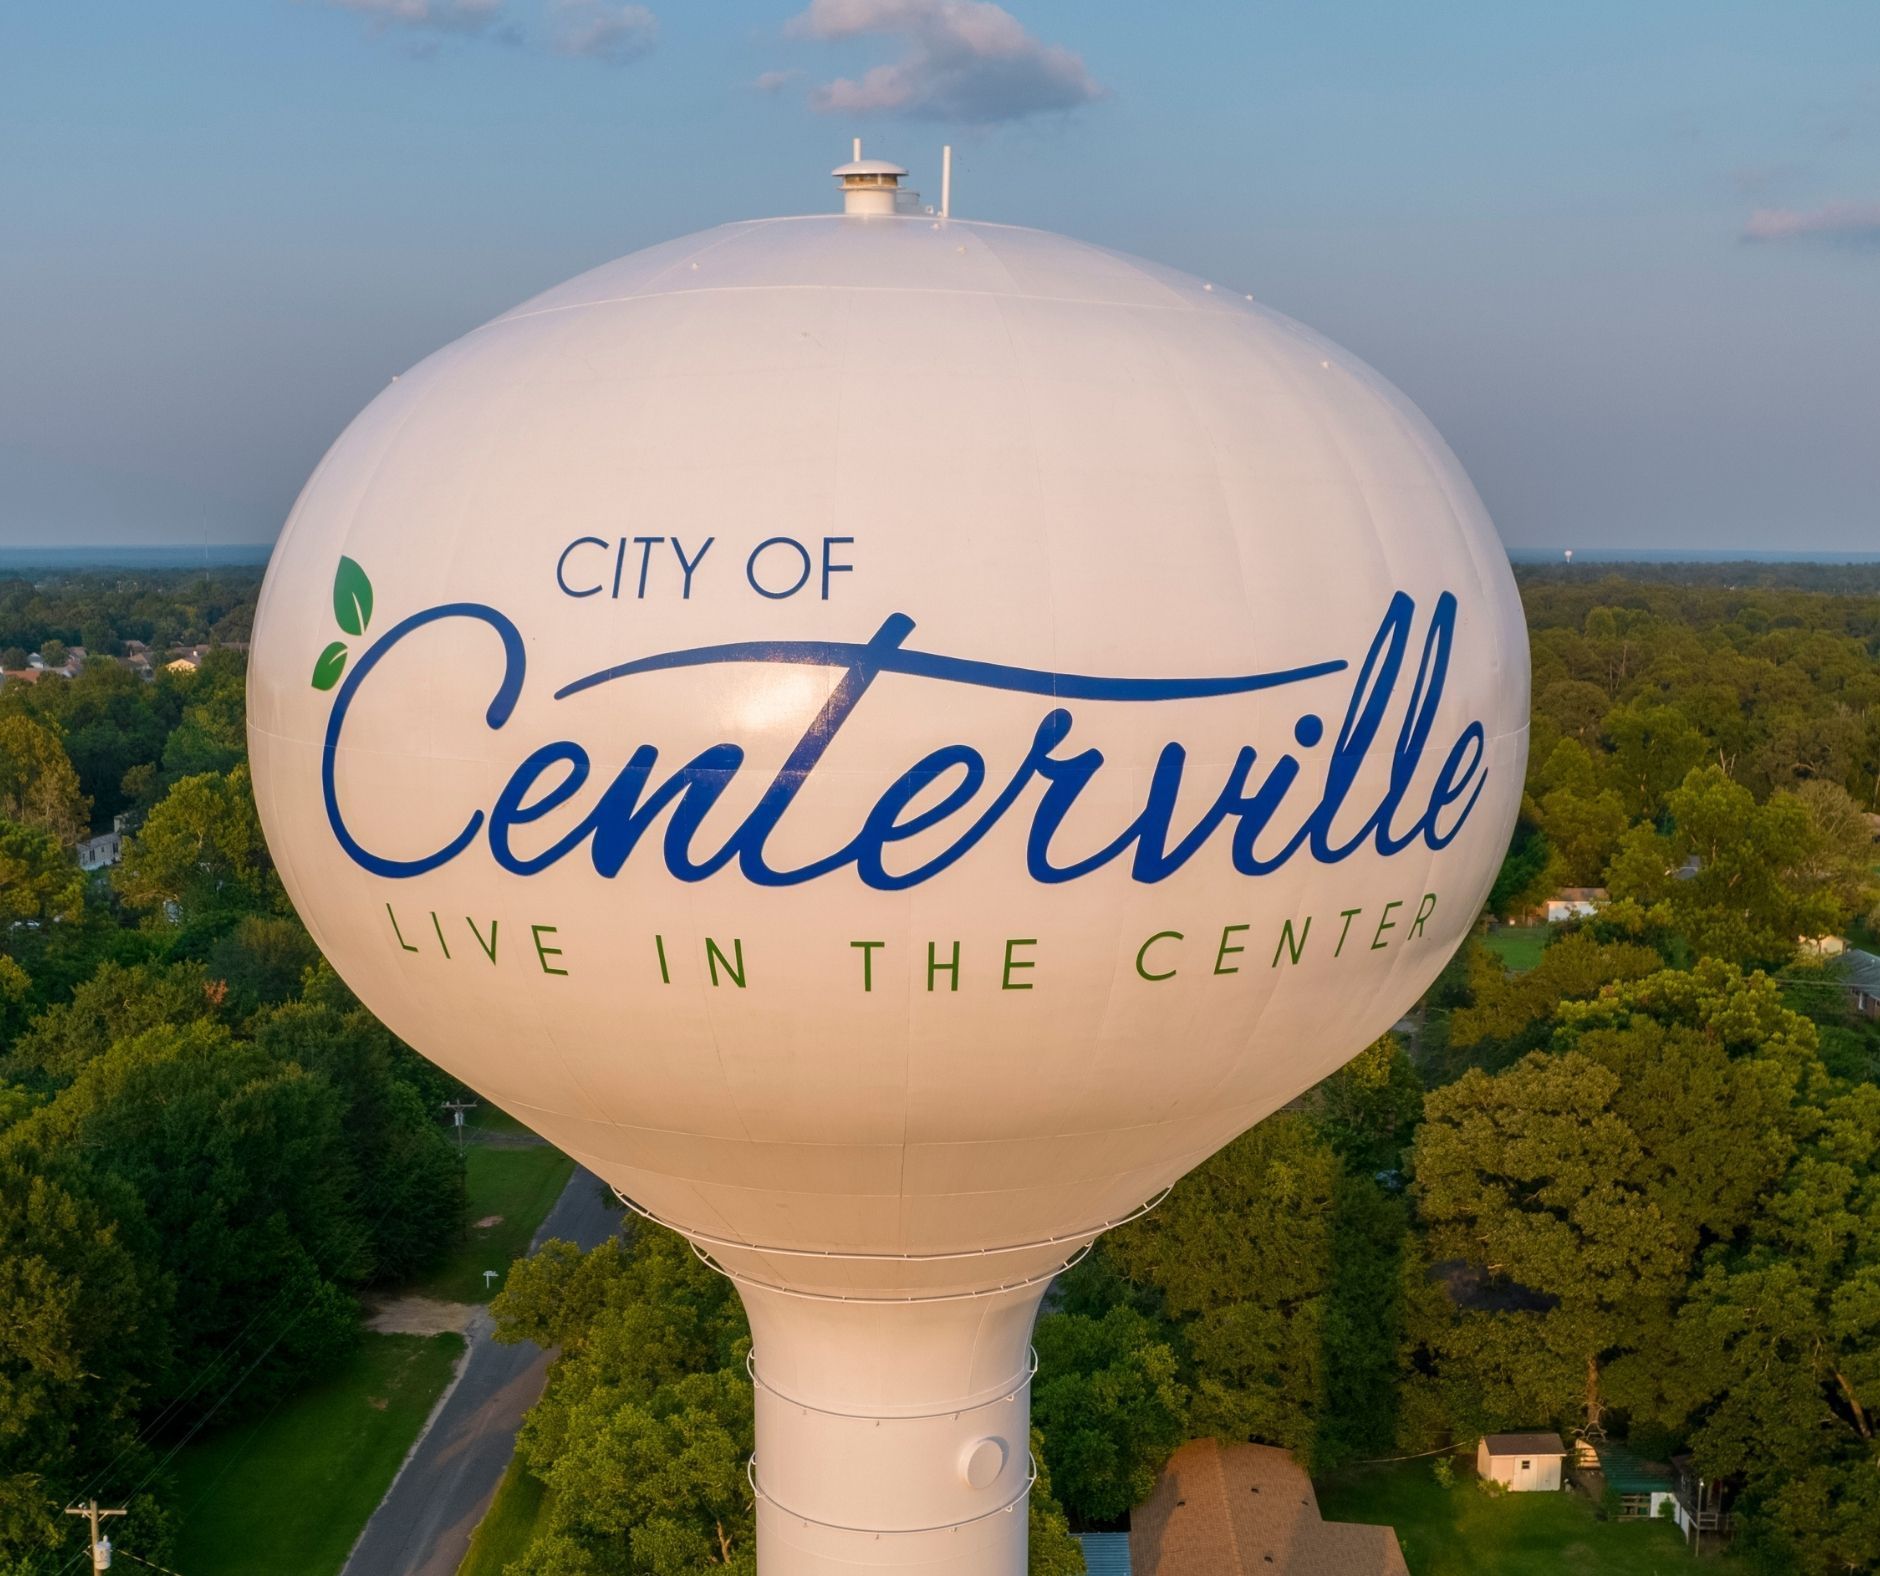 An aerial view of a water tower in the city of centerville